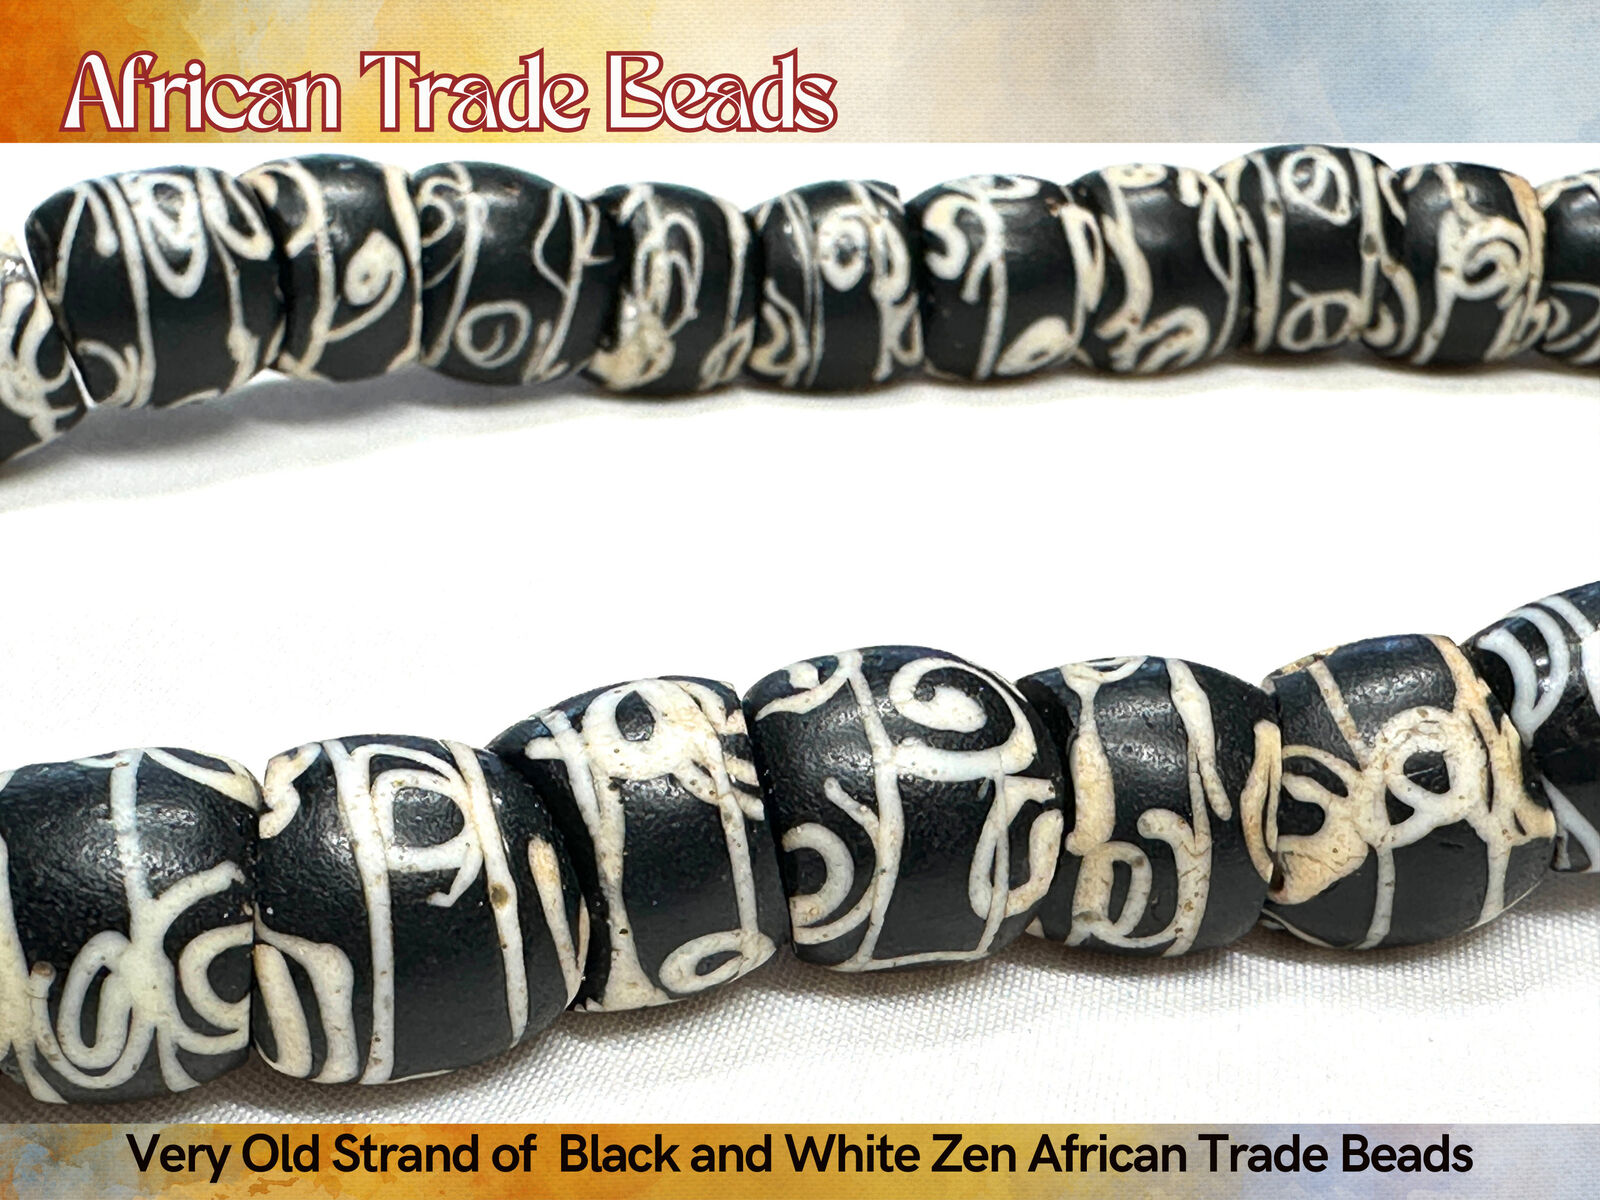 Strand of Very Old Black and White Zen African Trade Beads